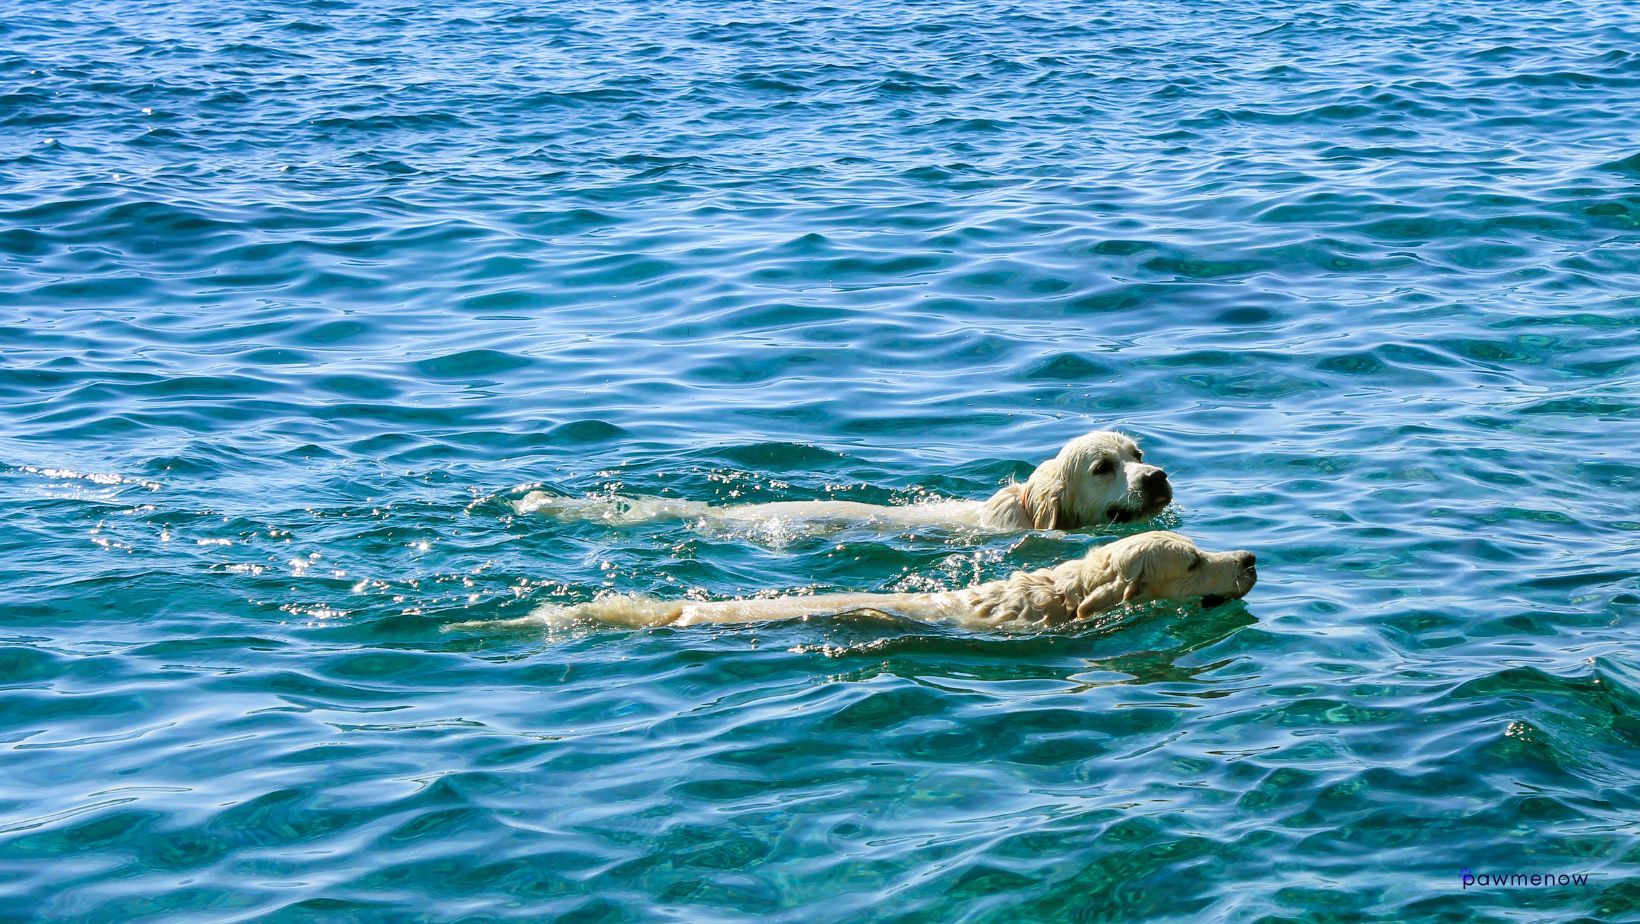 Is it safe to let your dog swim in the ocean